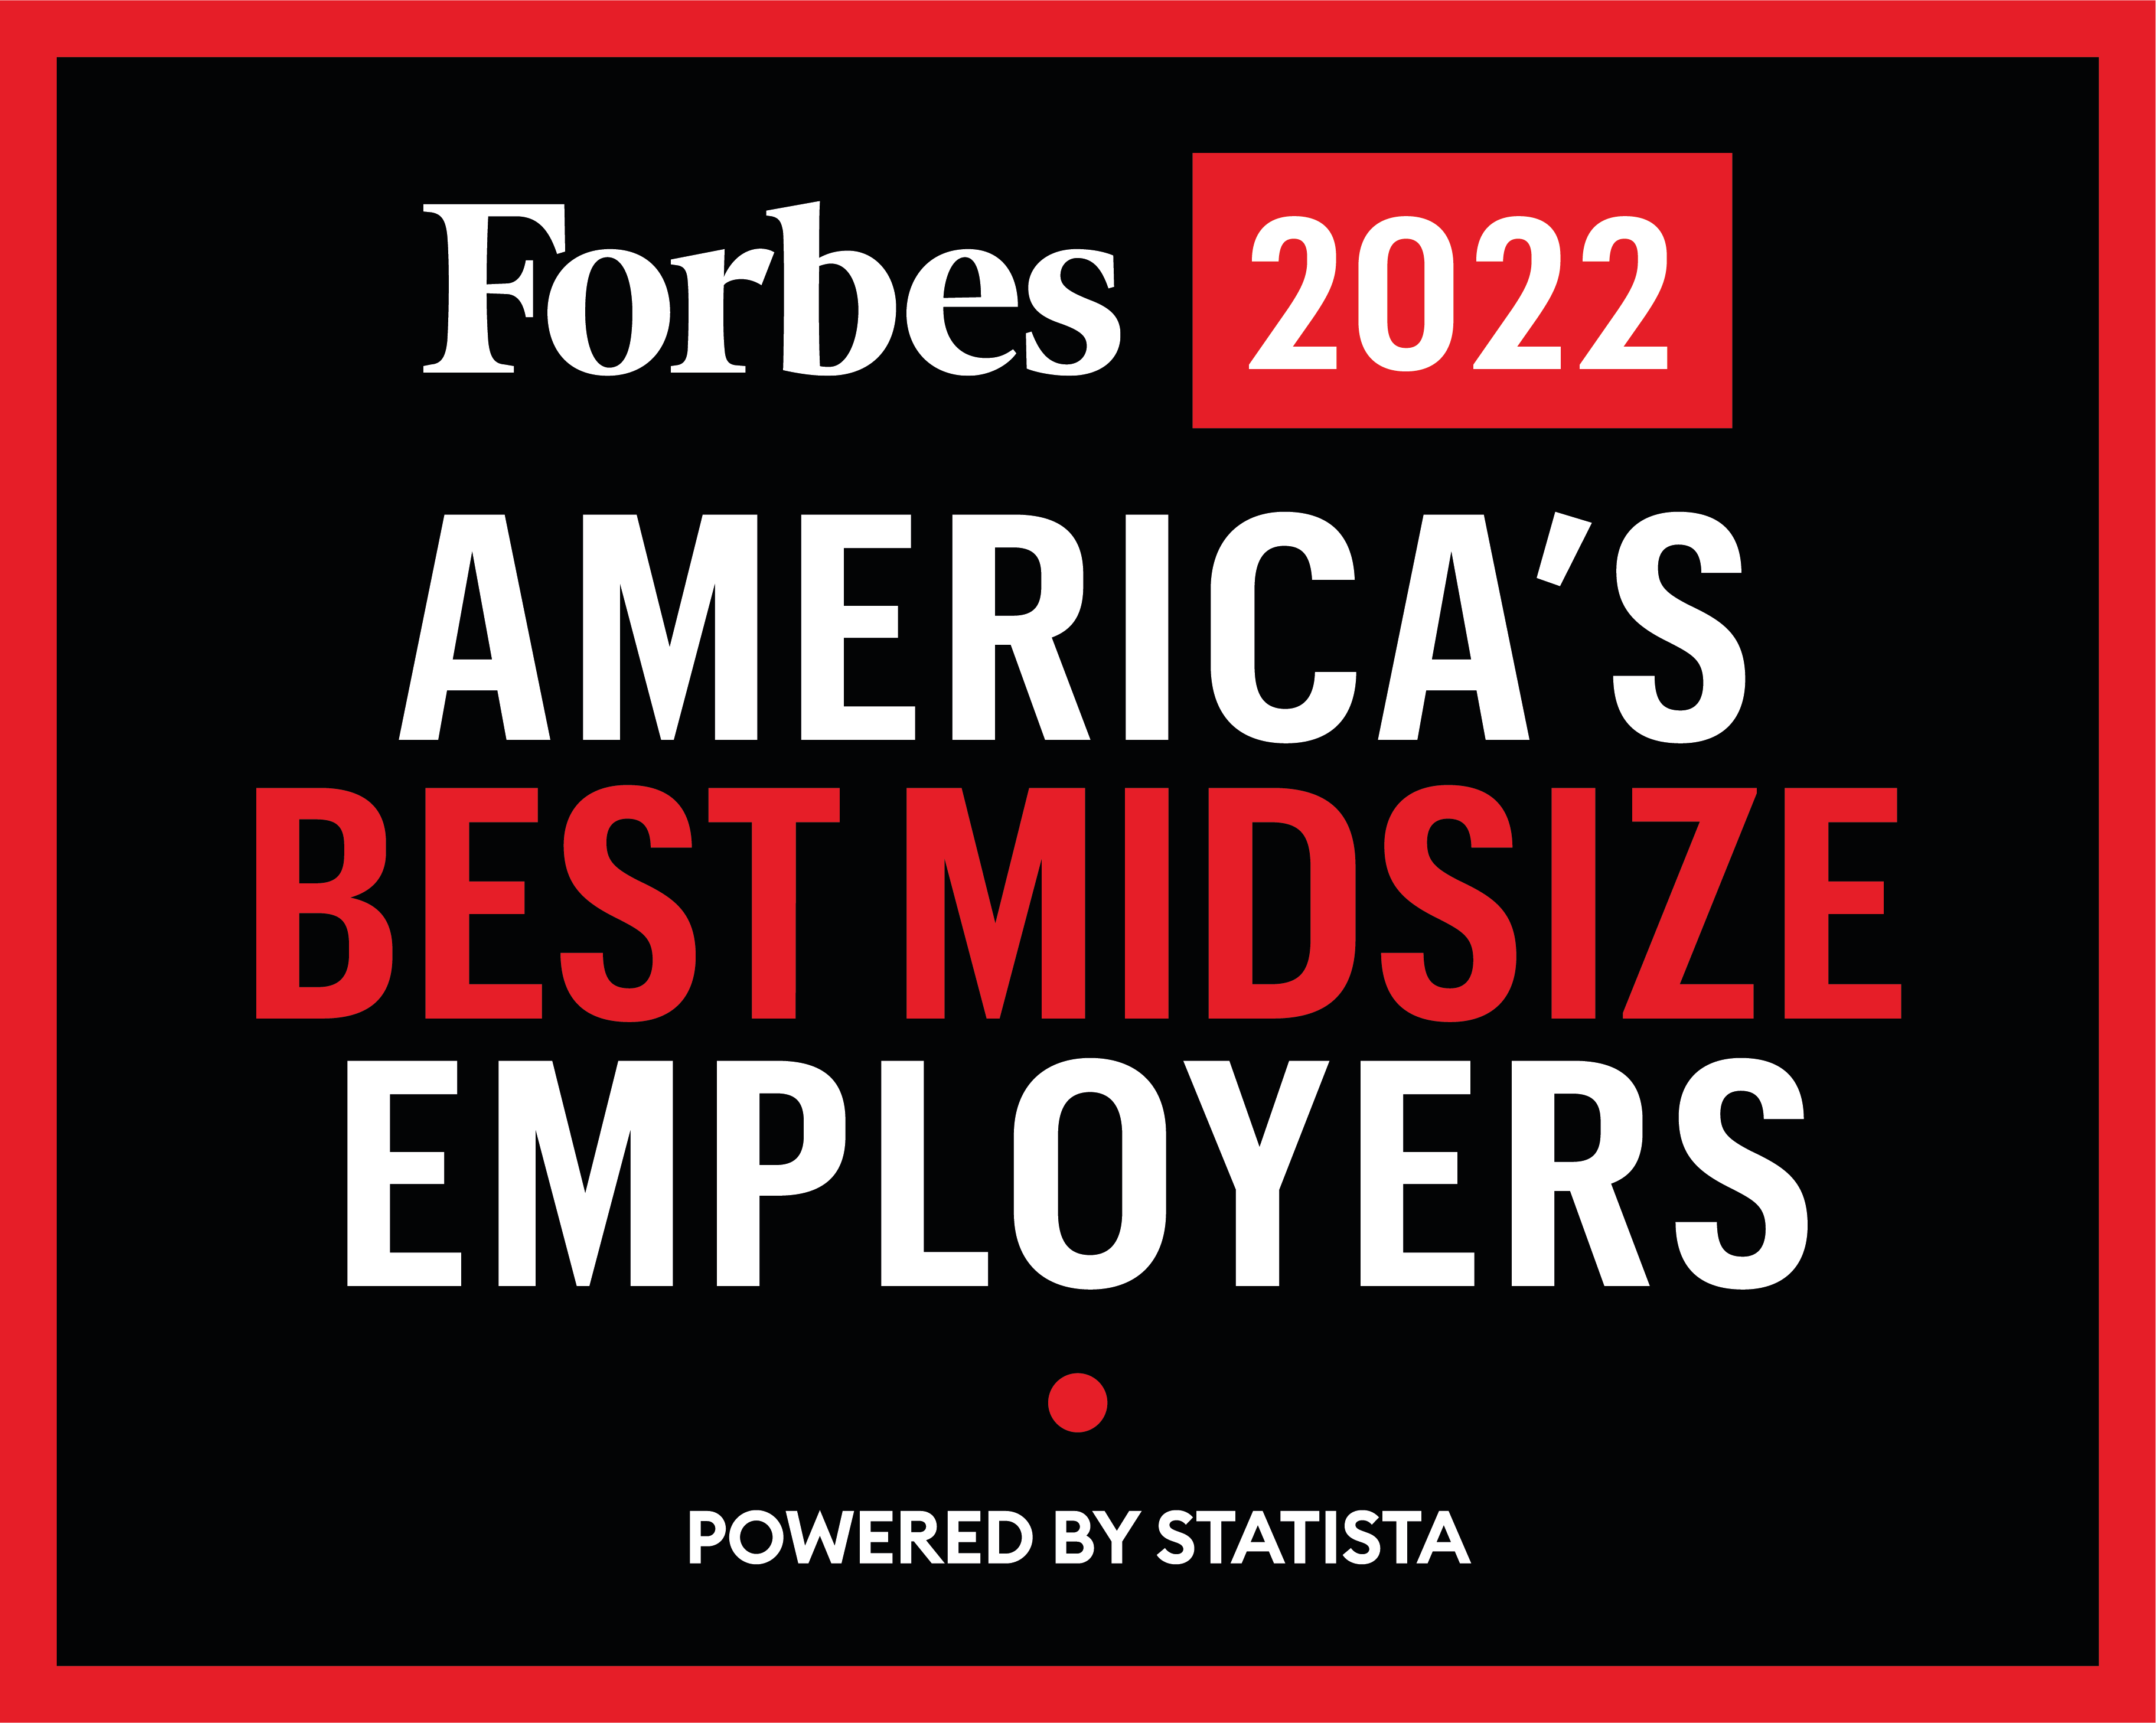 Forbes 2022 America's best midsize employers